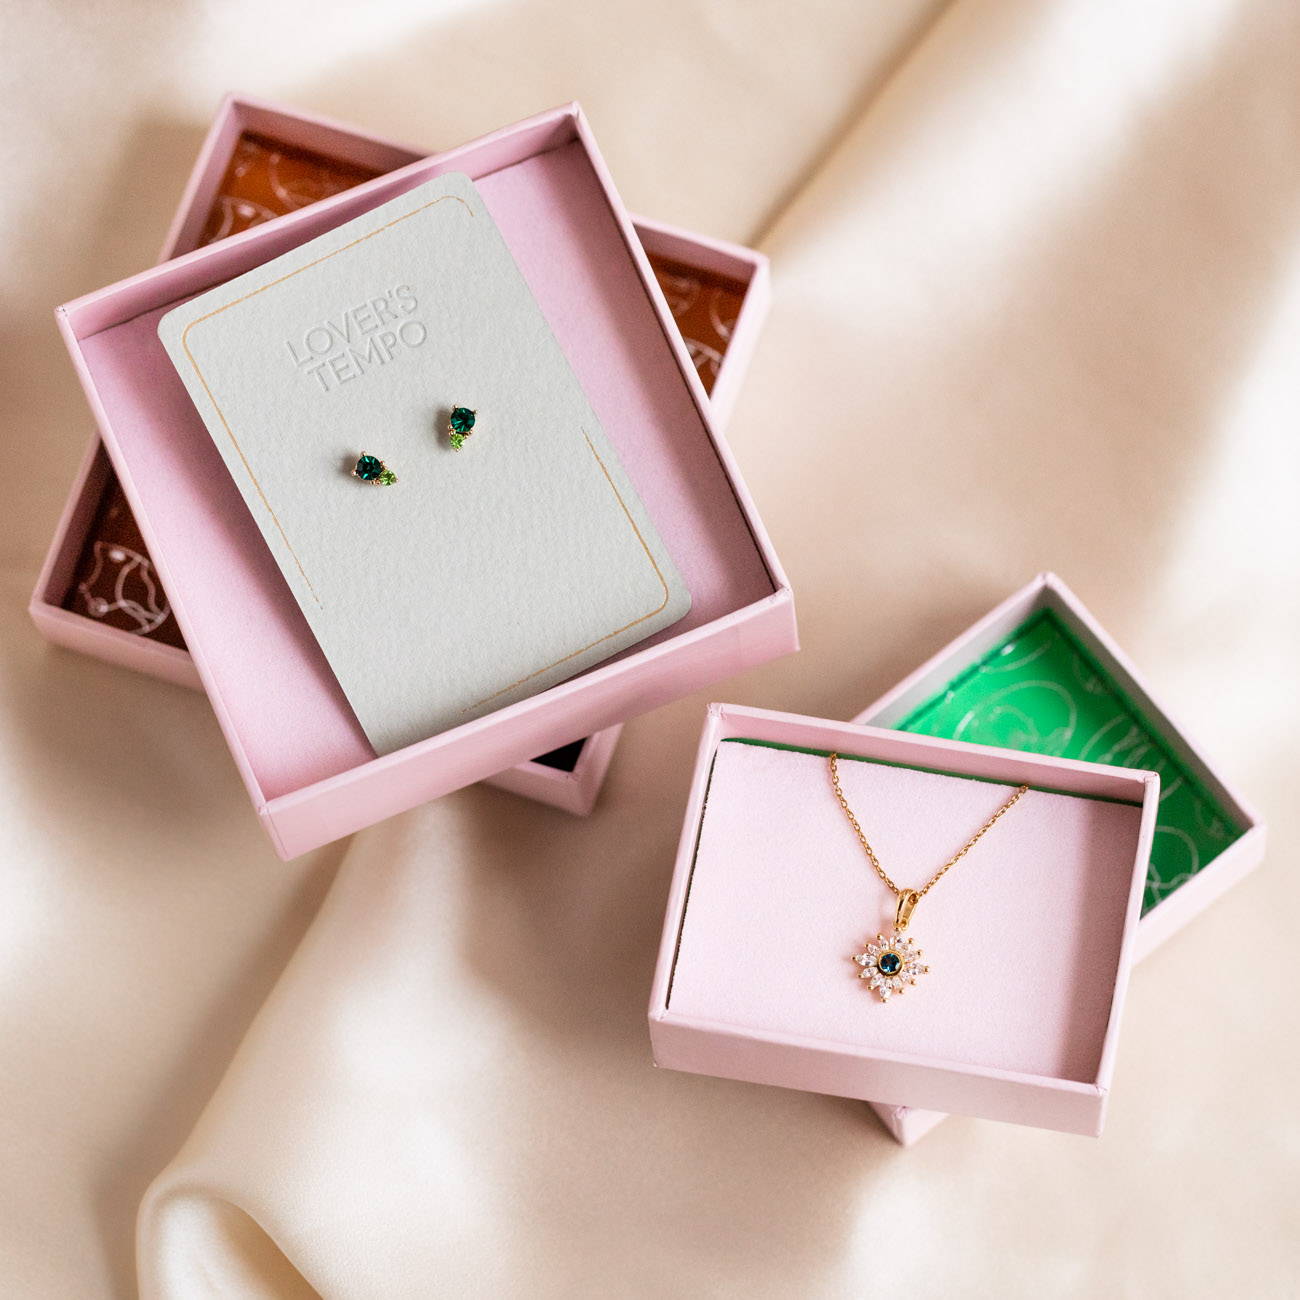 Best Jewelry Subscription Box | Local Eclectic – local eclectic